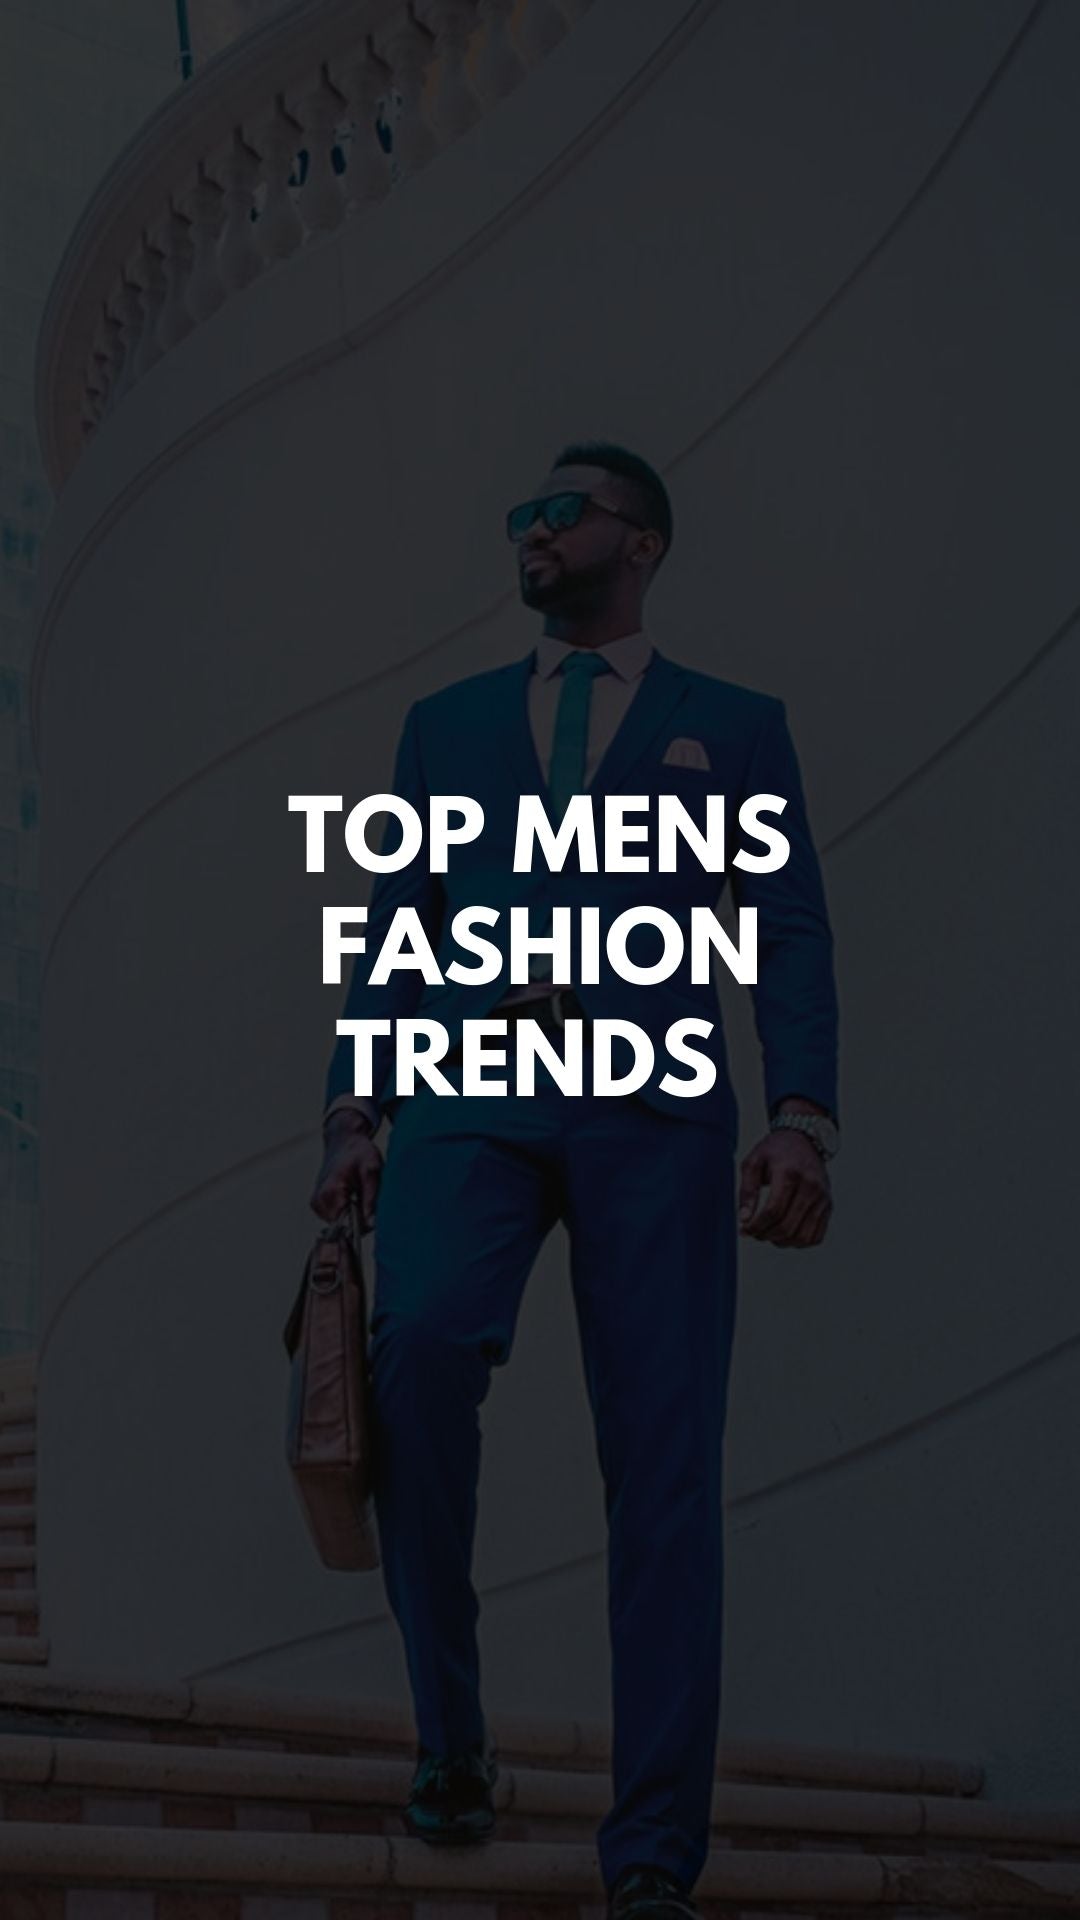 Expand Your Style Horizons With These Men’s Fashion Trends